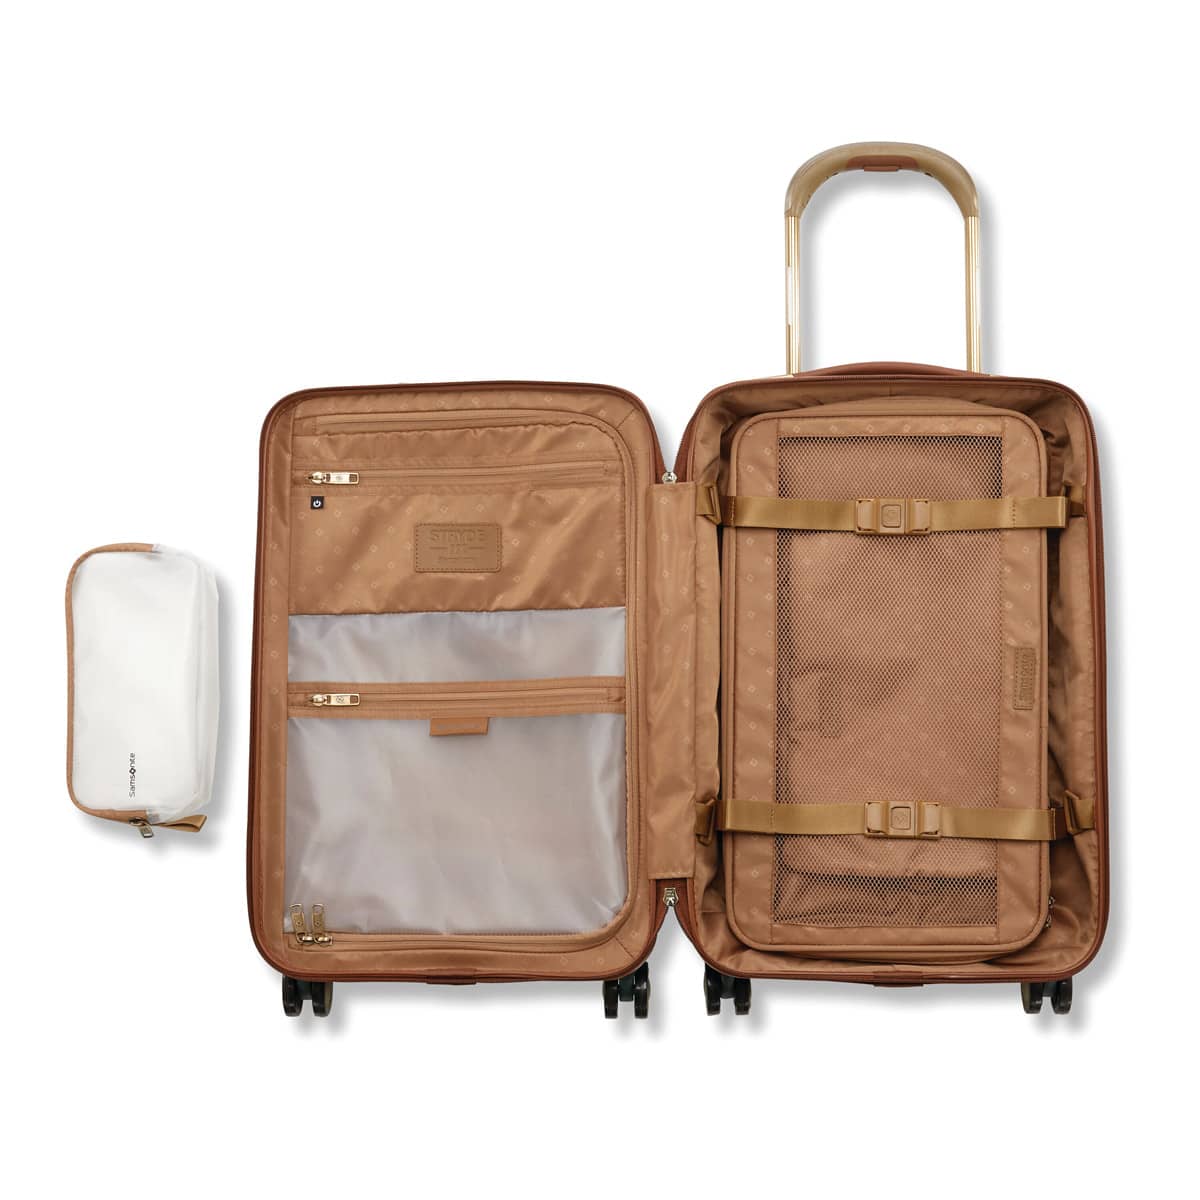 Best carry-on luggage for business travelers